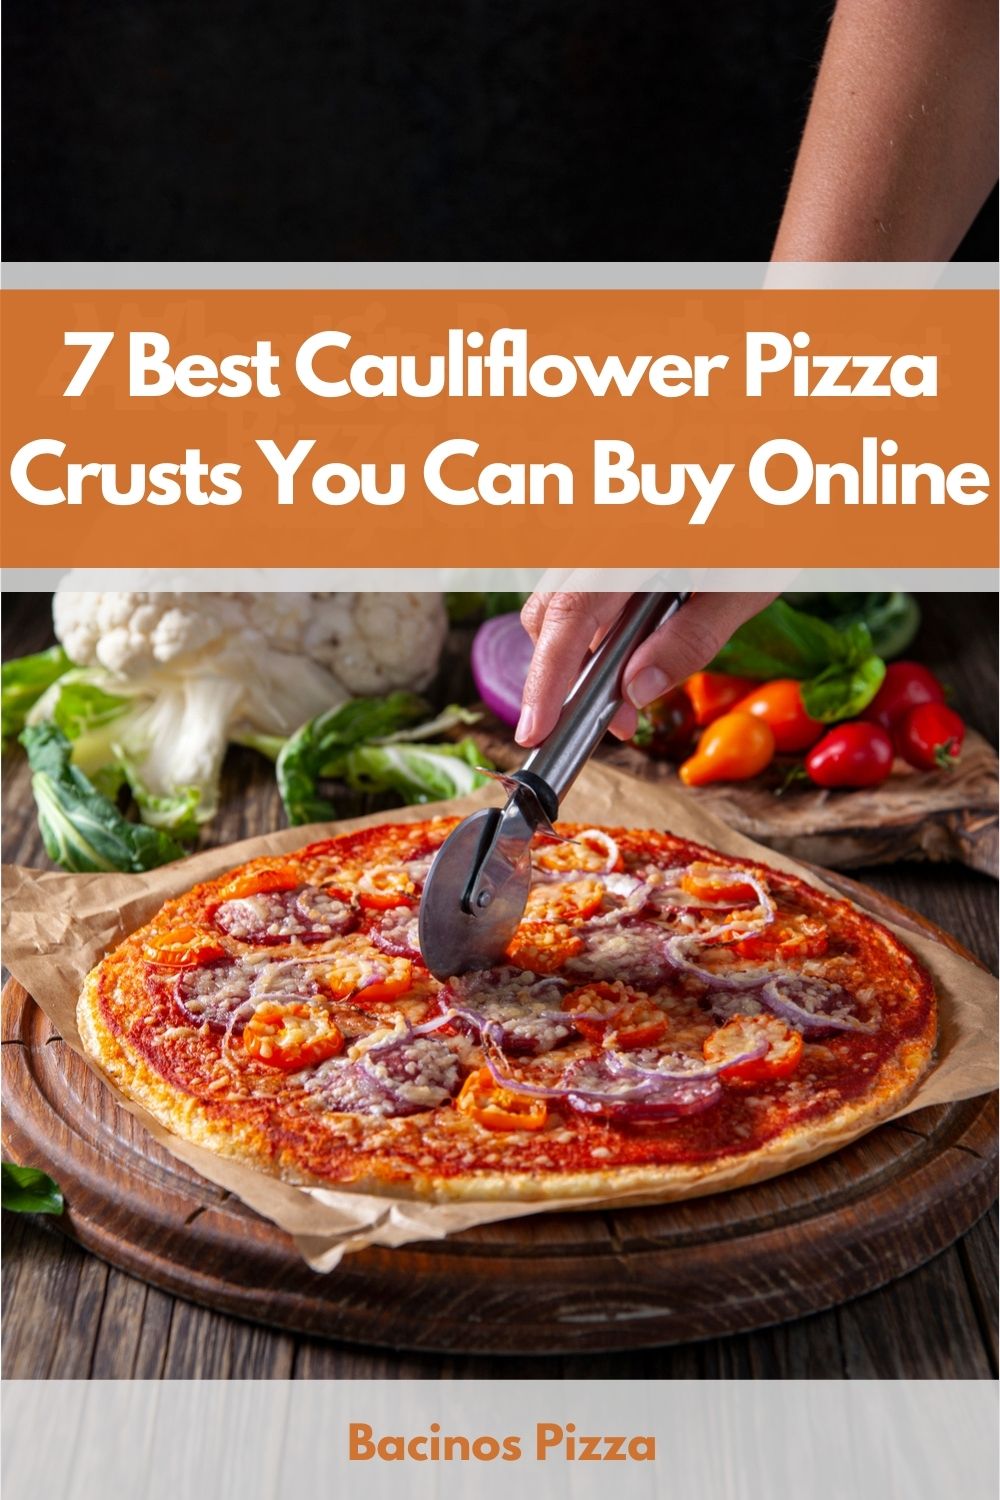 7 Best Cauliflower Pizza Crusts You Can Buy Online pin